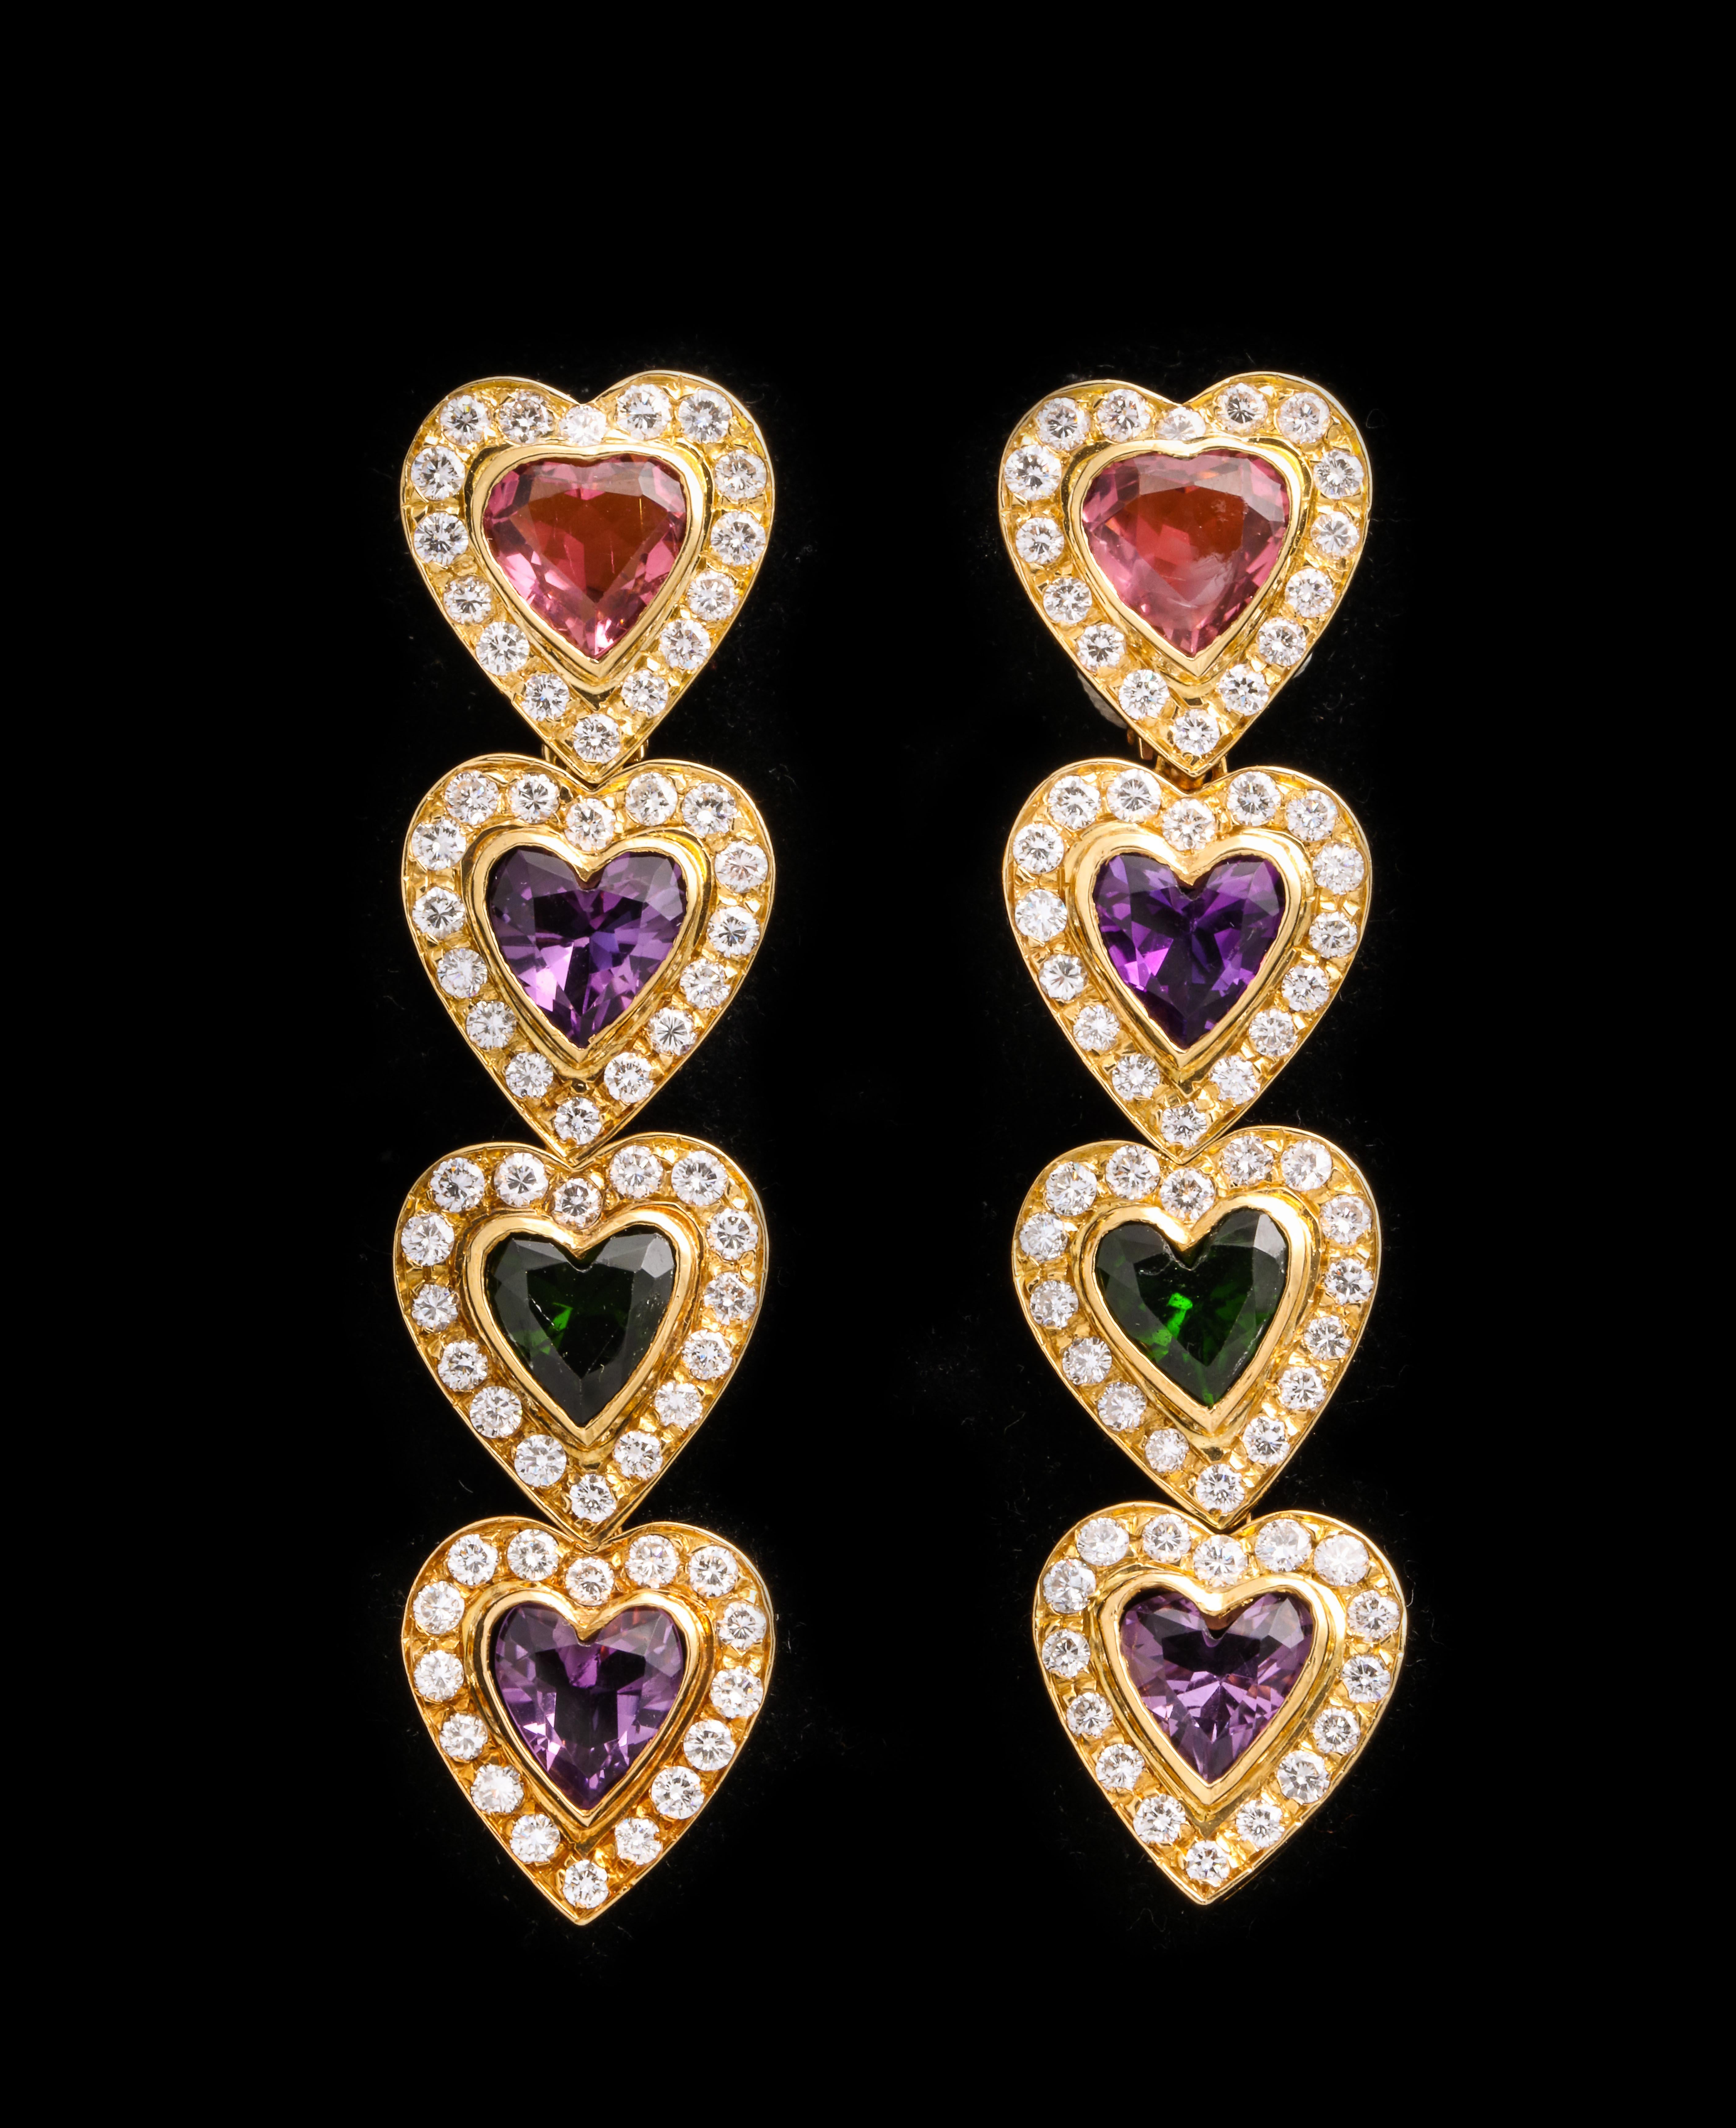 Multi Colored Sapphire Heart Earrings

Set with pink tourmaline, amethyst, and garnet

Approx 5.65 ct diamonds
18k yellow gold